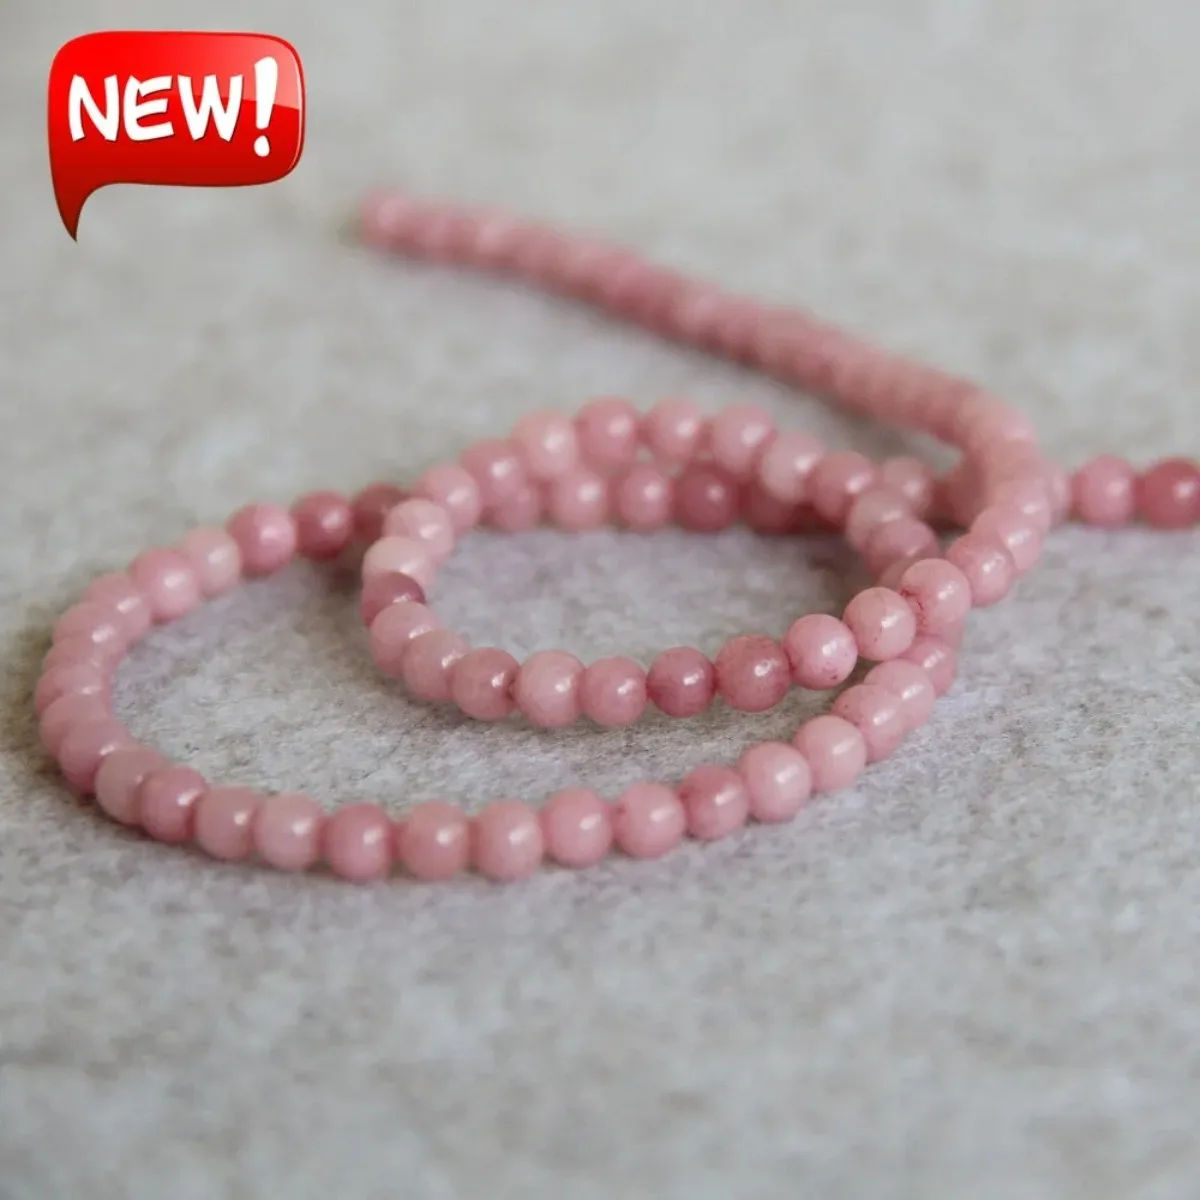 

4mm Accessory Crafts Pink jade Chalcedony Round Semi Finished Stone Gifts Loose DIY Beads 15inch Jewelry Making Fitting Female